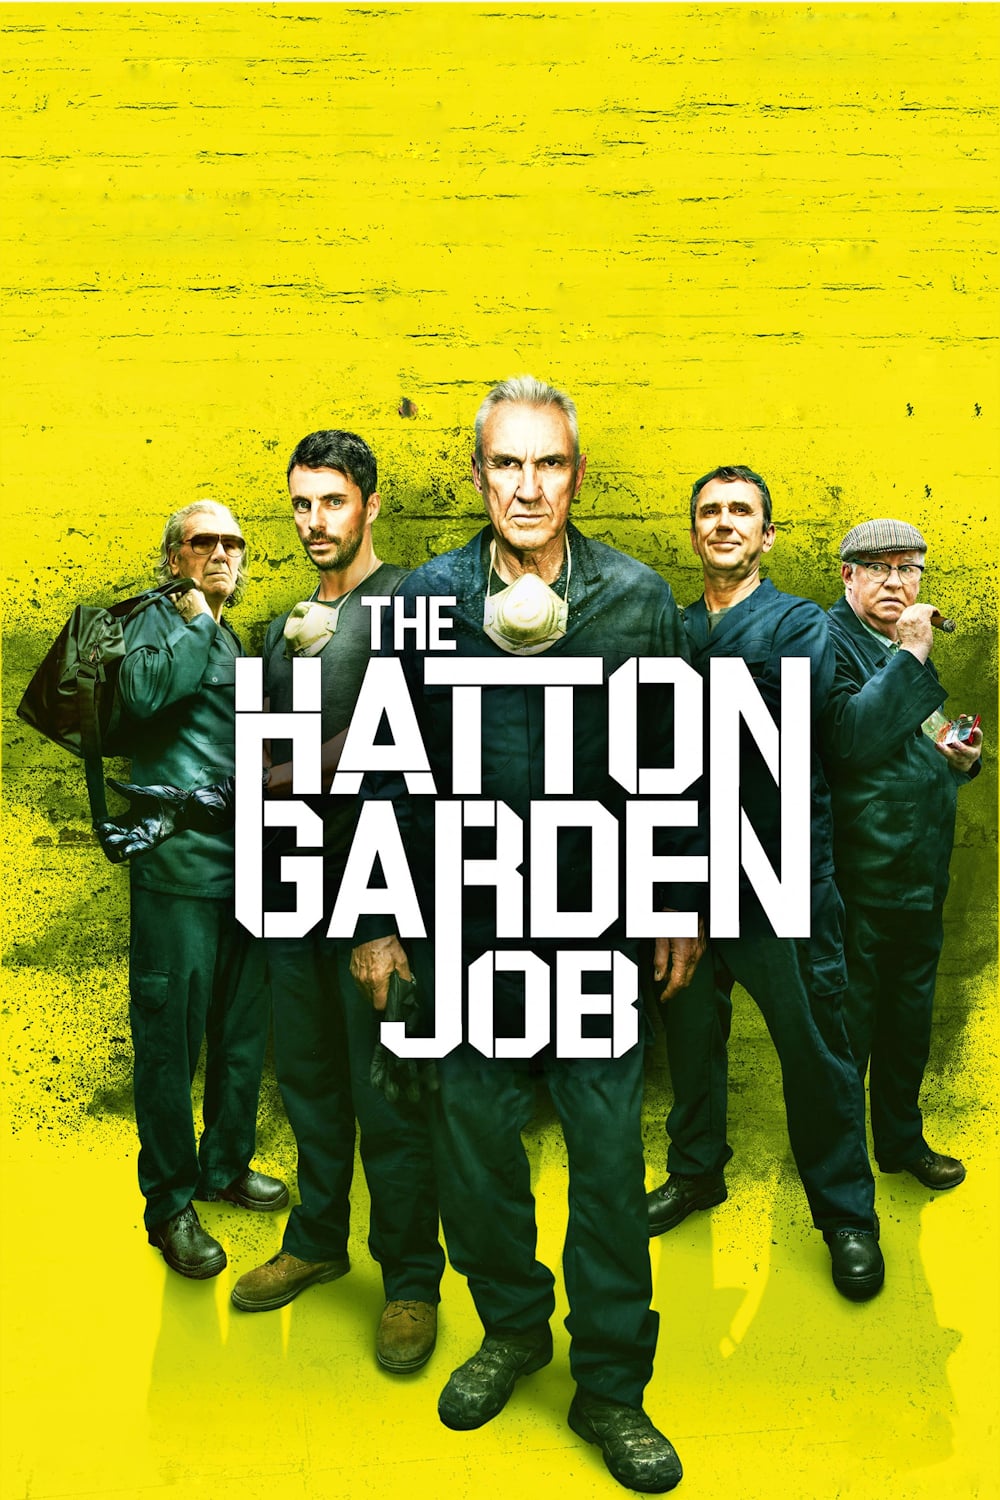 Poster for the movie "The Hatton Garden Job"